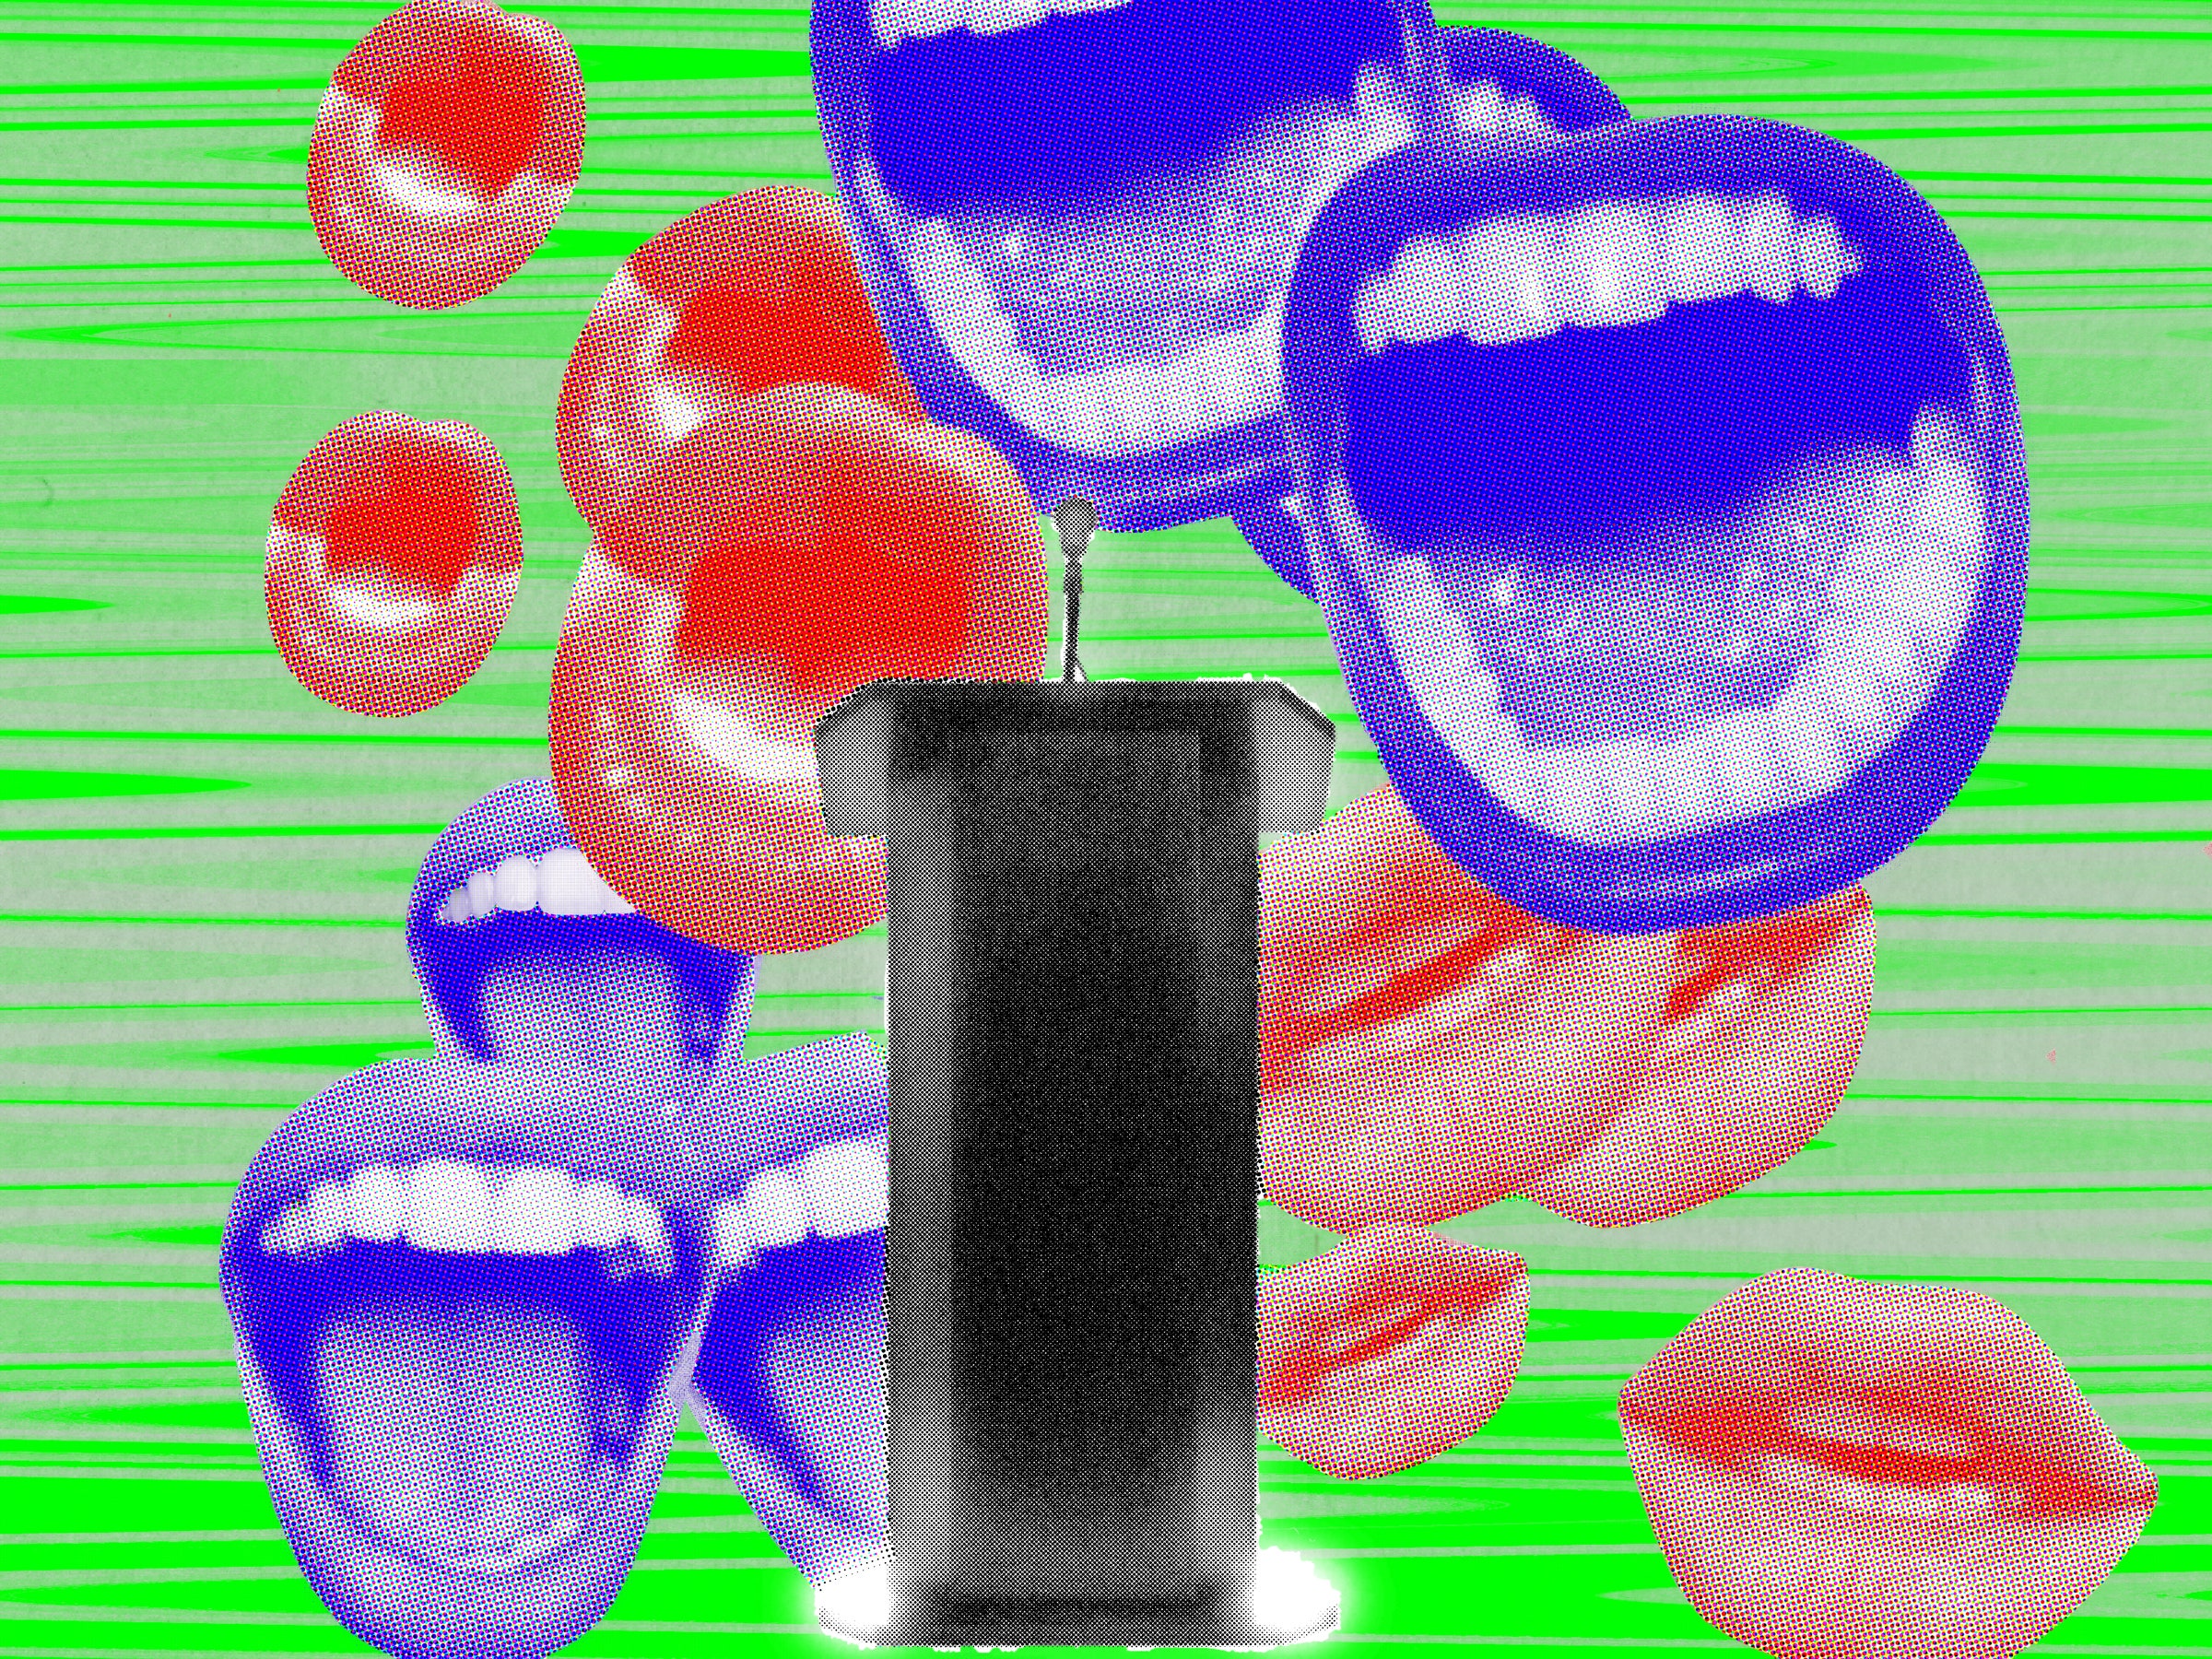 An illustration of a myriad of overlayed halftoned mouths surrounding a debate podium.